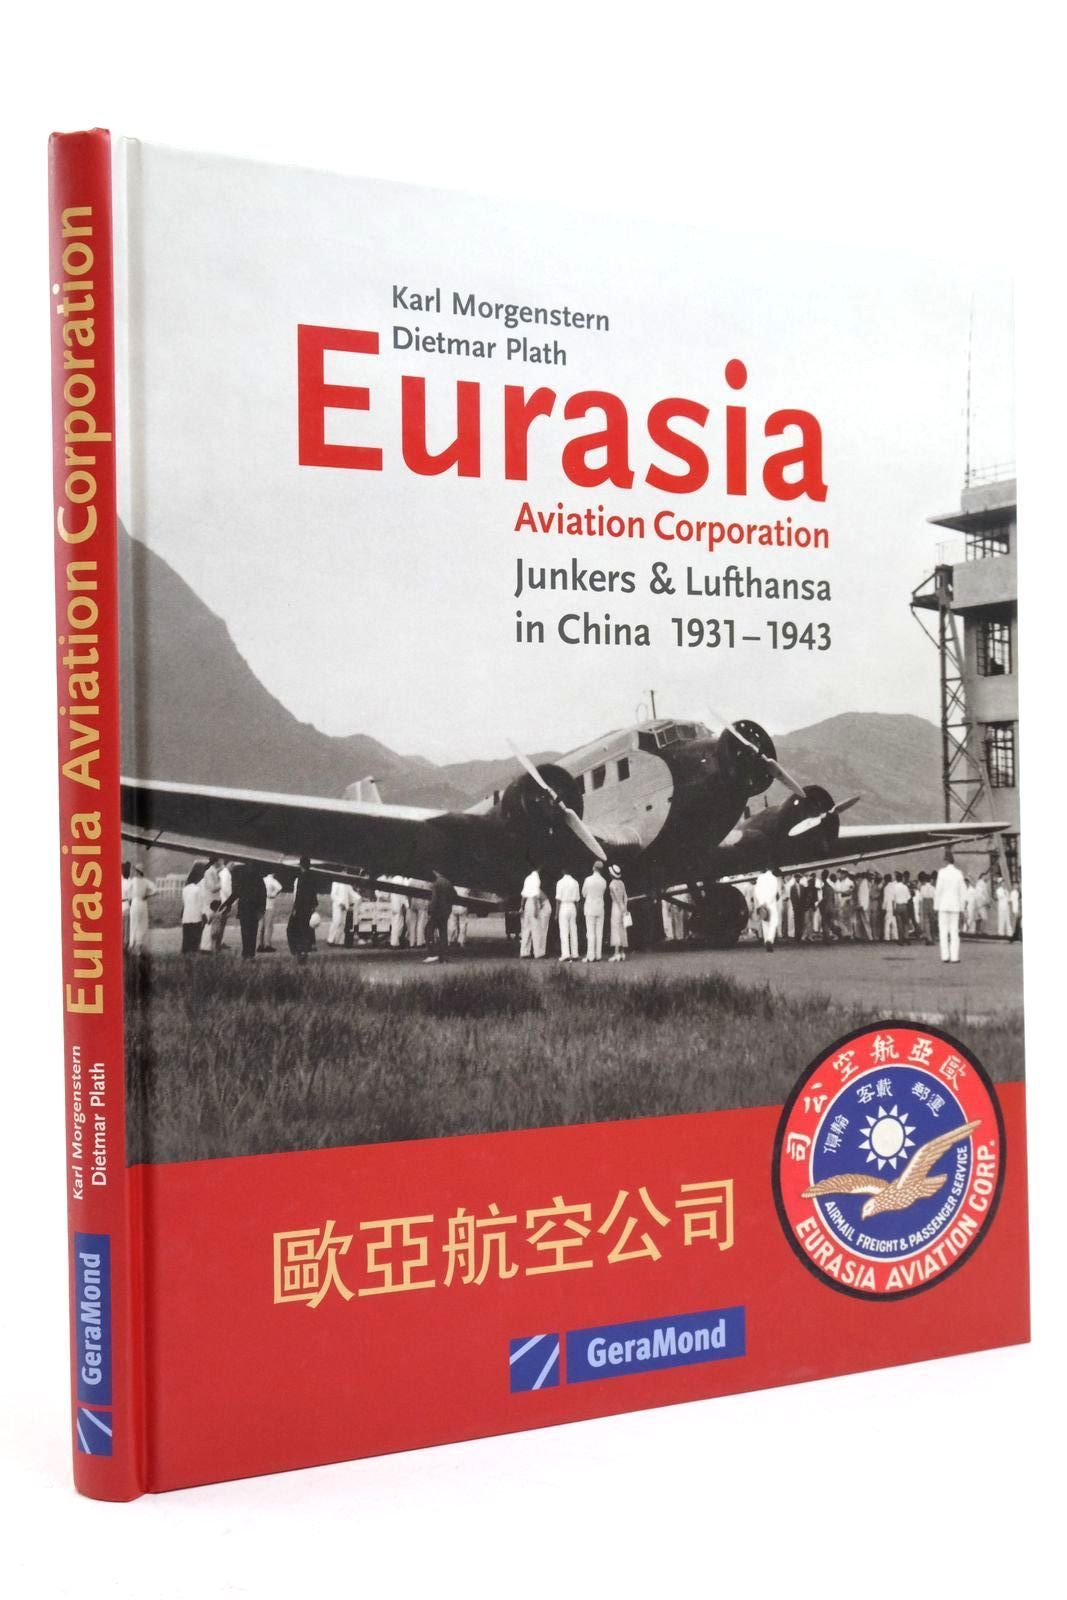 Photo of EURASIA AVIATION CORPORATION: JUNKERS &amp; LUFTHANSA IN CHINA 1931-1943 written by Morgenstern, Karl Plath, Dietmar published by Geramond Verlag (STOCK CODE: 2138692)  for sale by Stella & Rose's Books